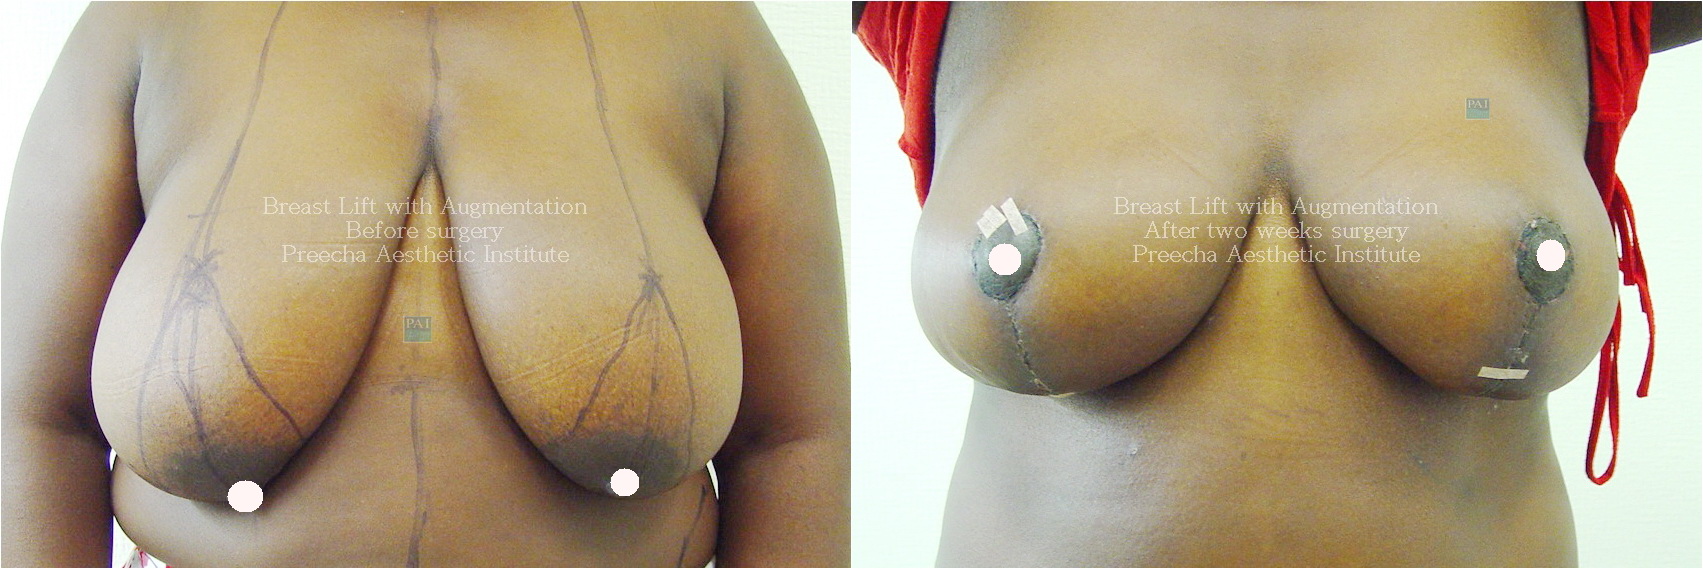 Breast Lift with Augmentation Before and After two weeks